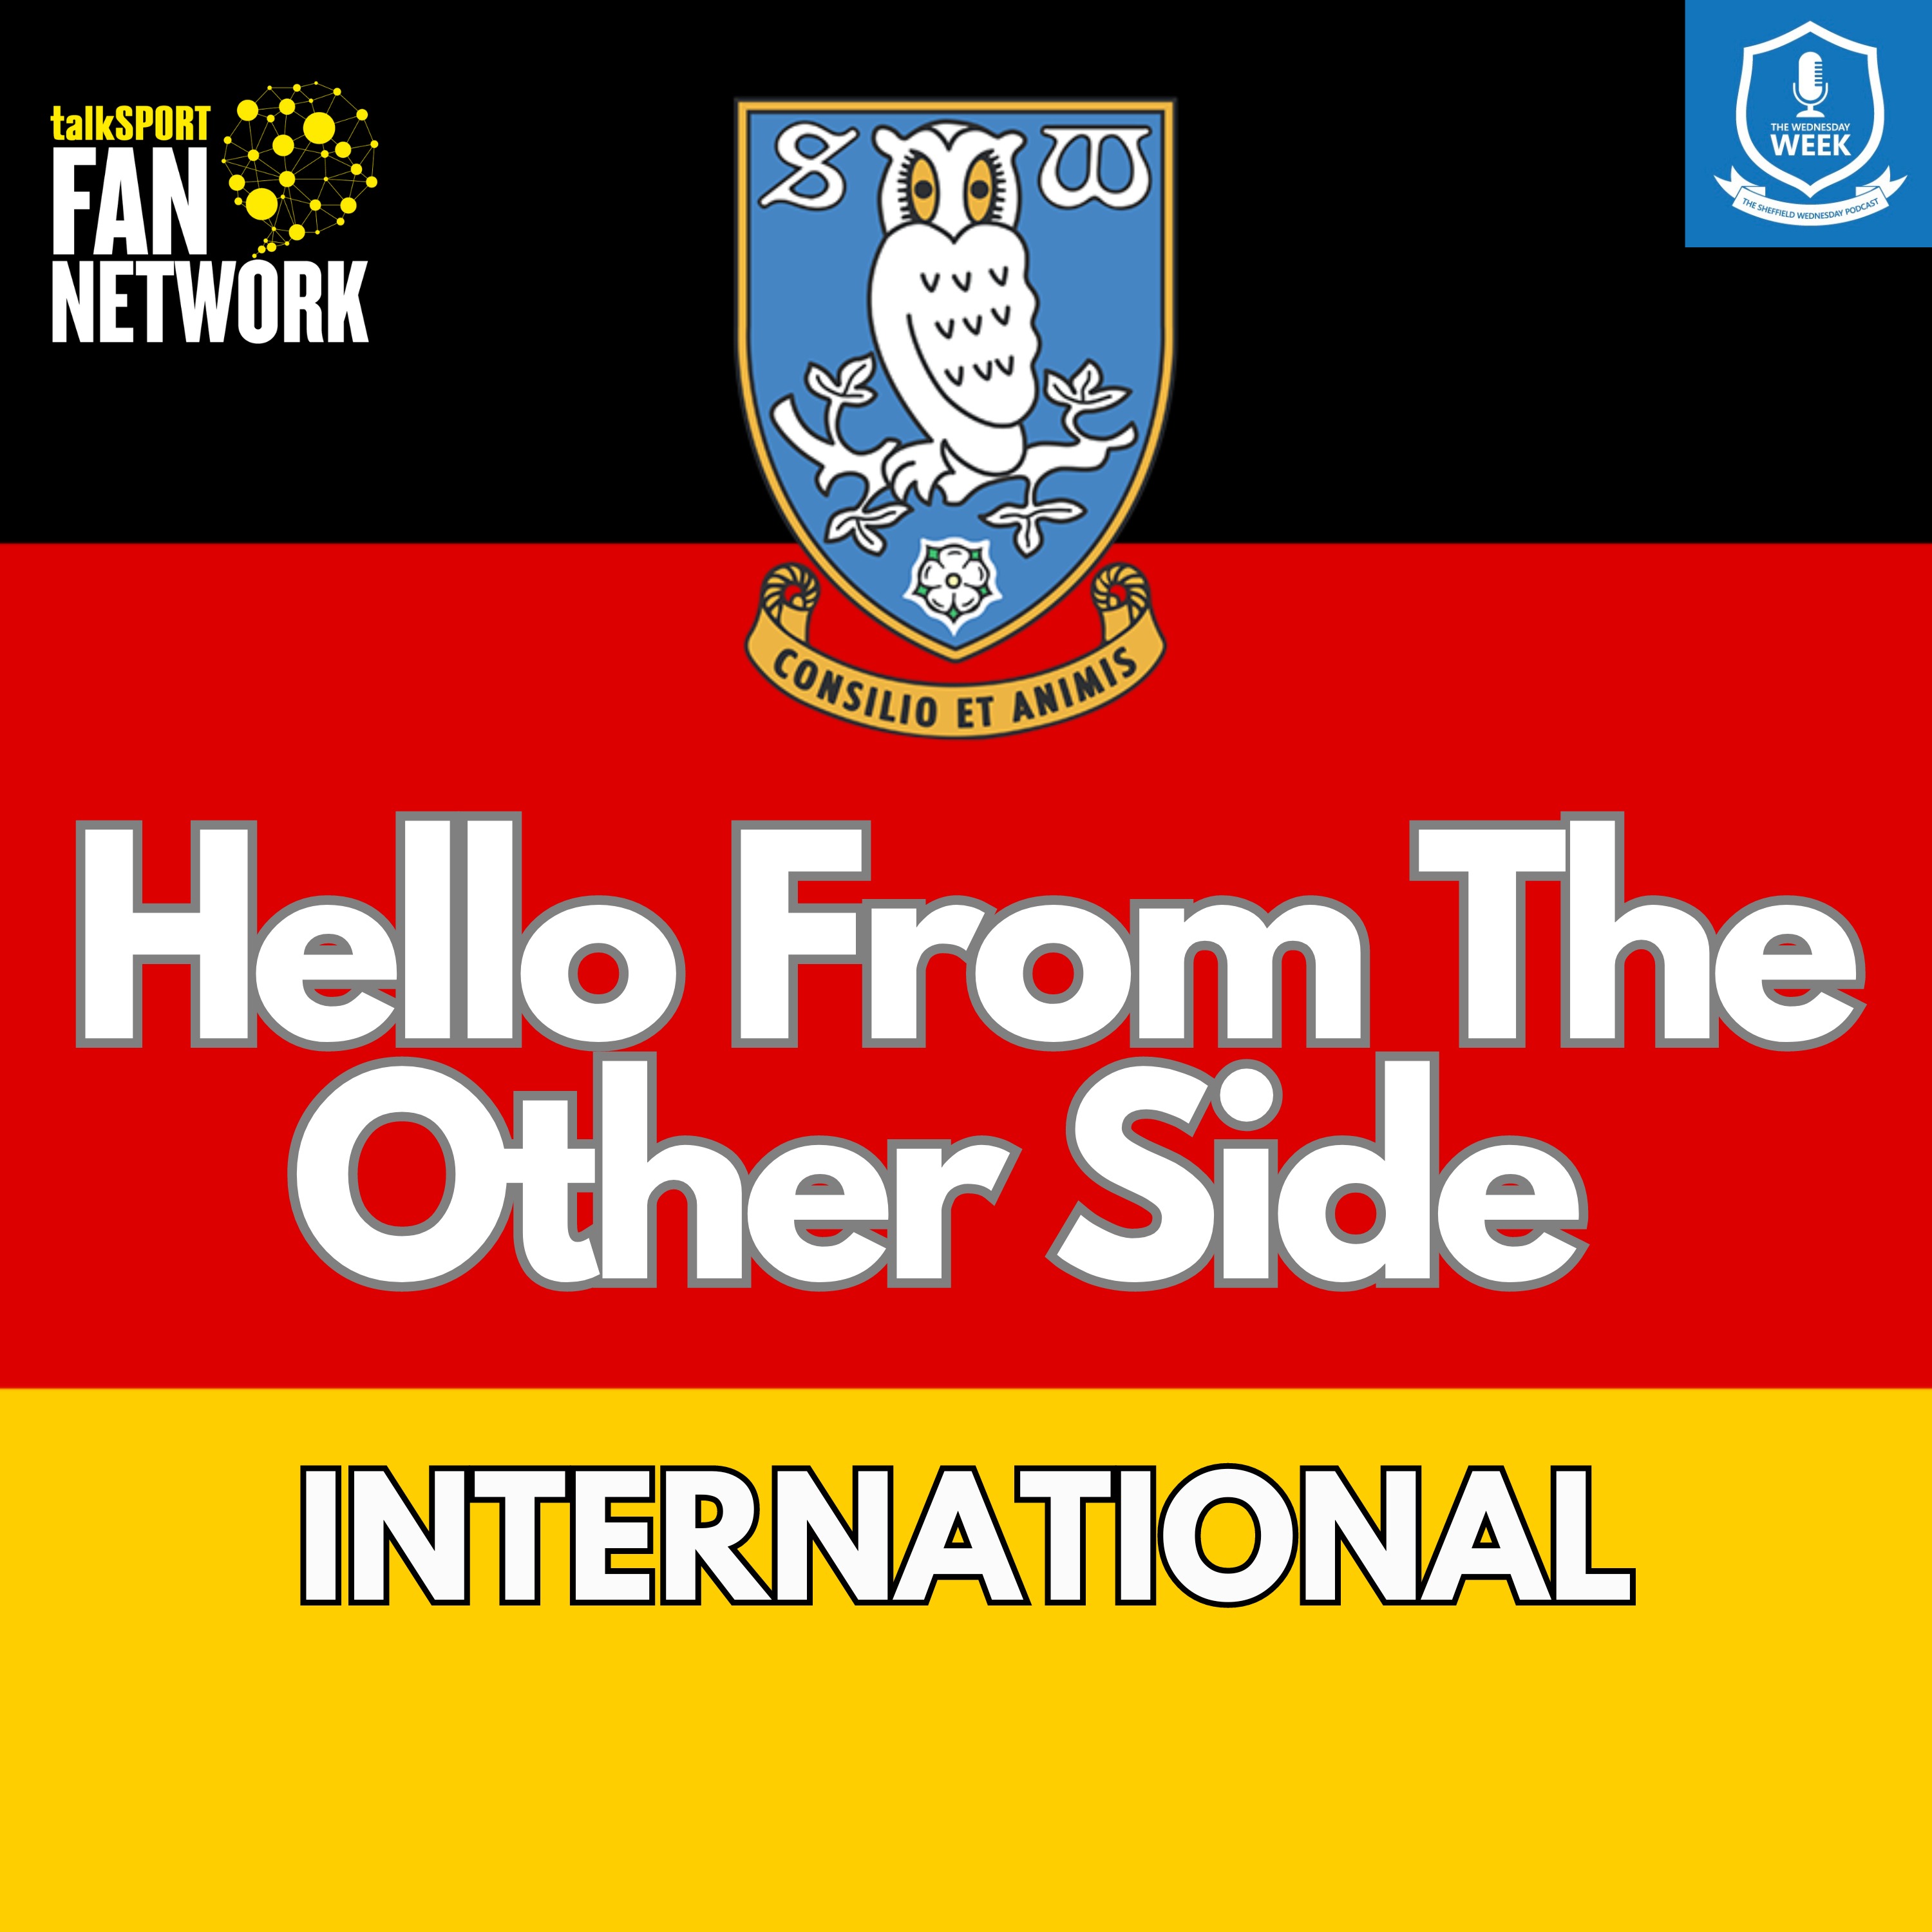 Hello from the other side - International